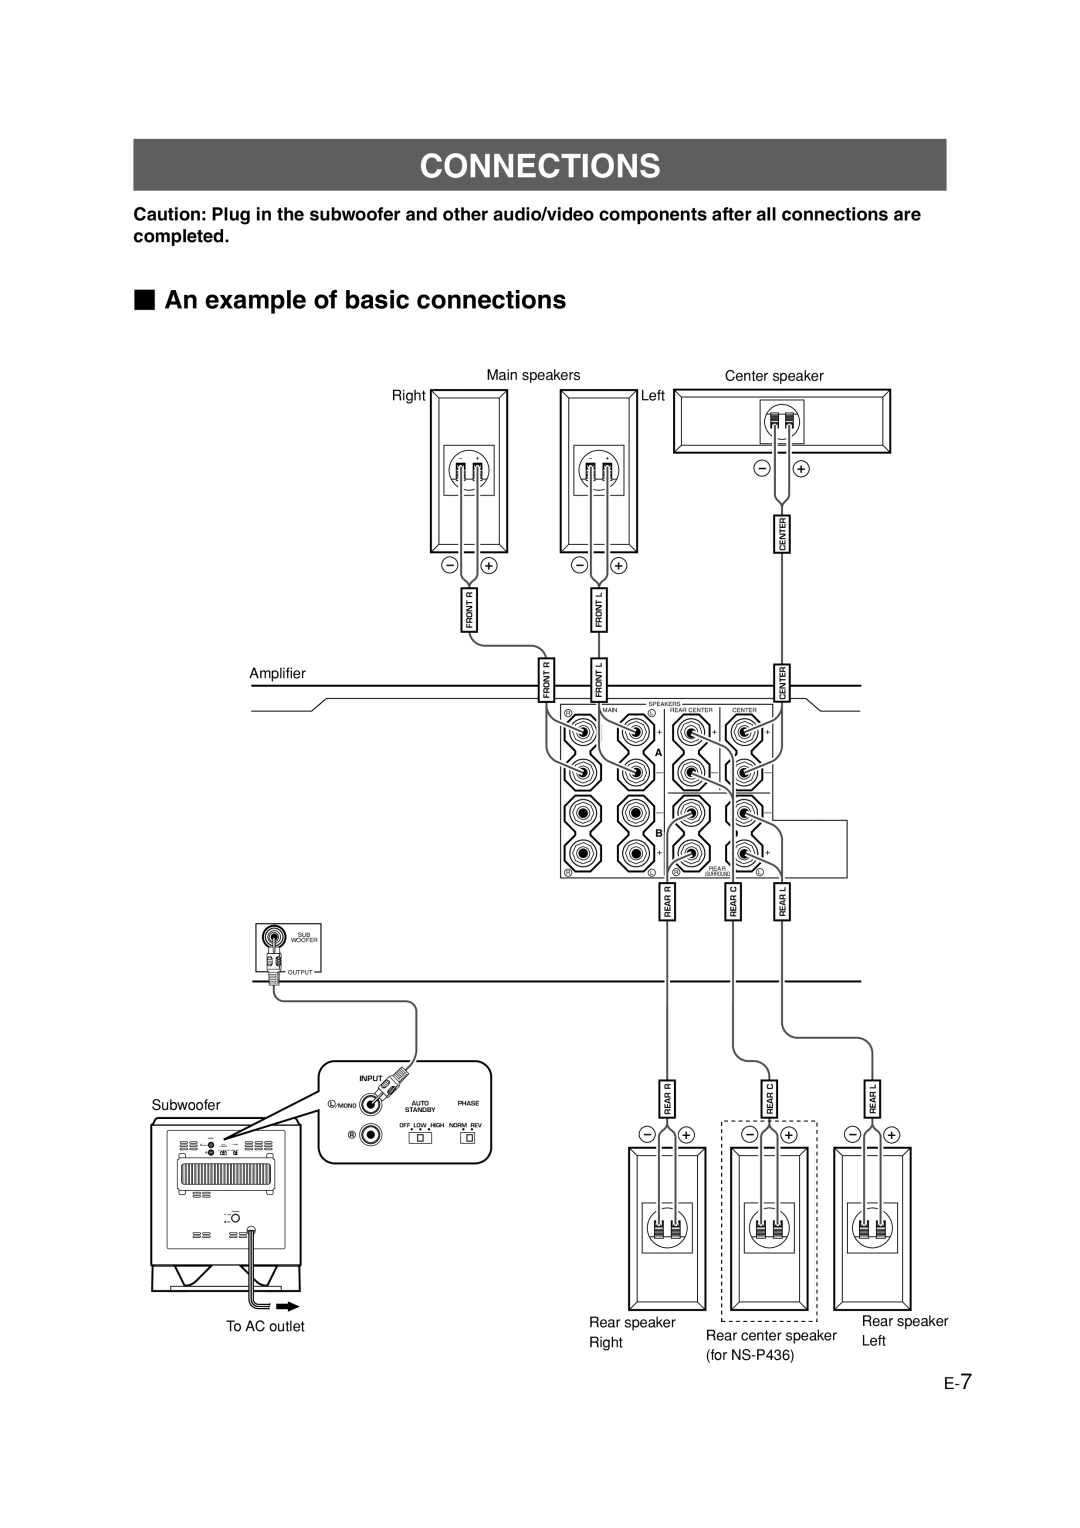 Yamaha HTR-5940 owner manual Connections, An example of basic connections 